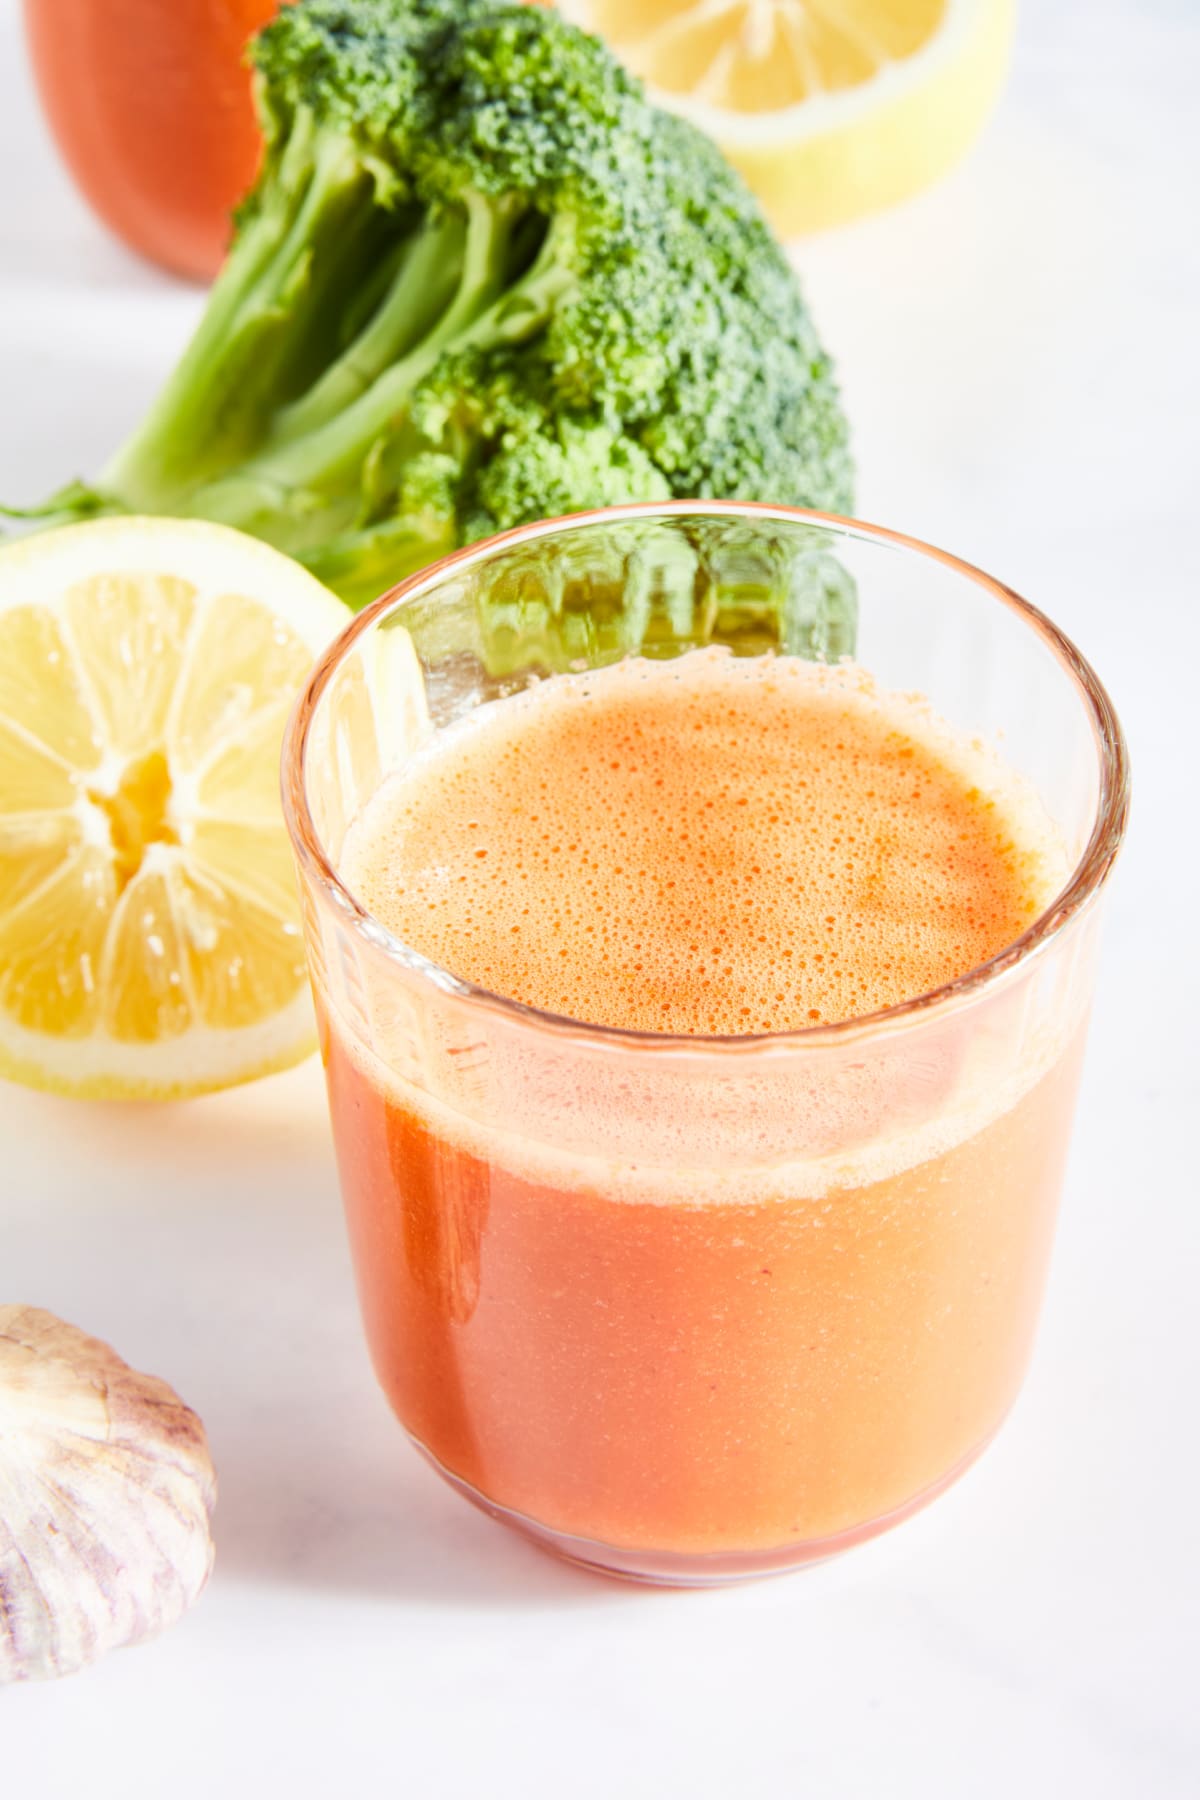 One glass of bright orange immune boosting juice sits on a bright white surface. Two lemon halves, a large broccoli tree, and a garlic bulb sit next to the juice.